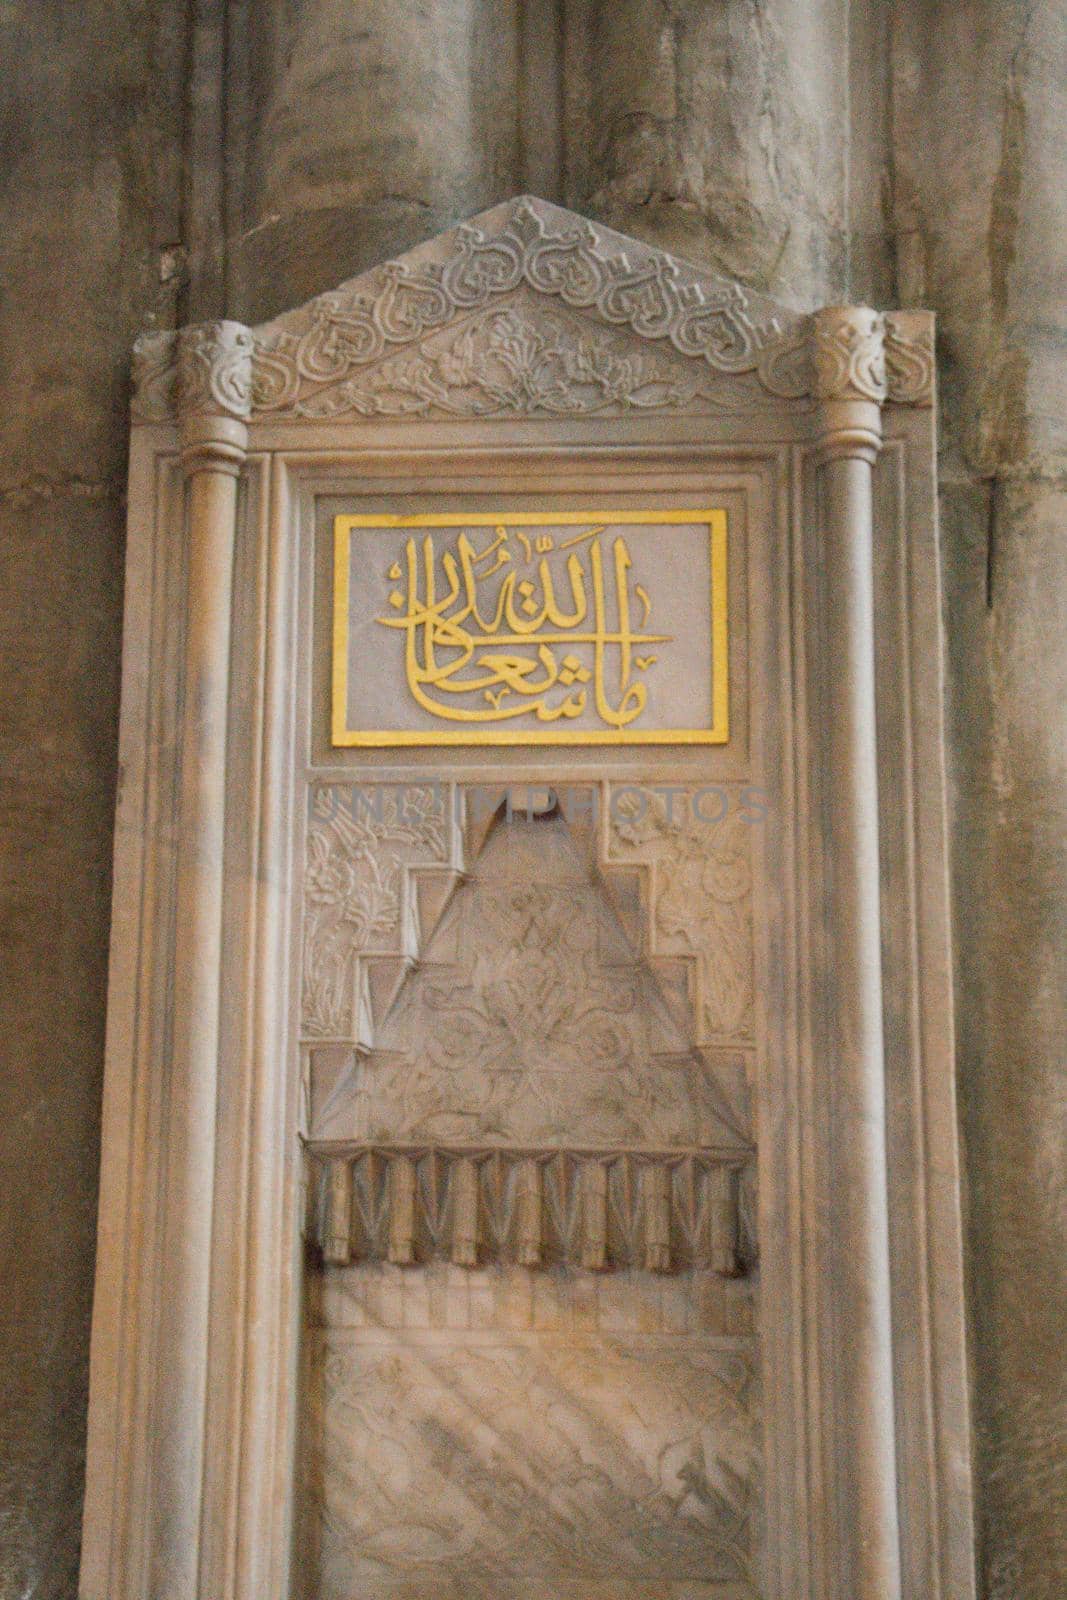 Ottoman marble stone carving art in detail